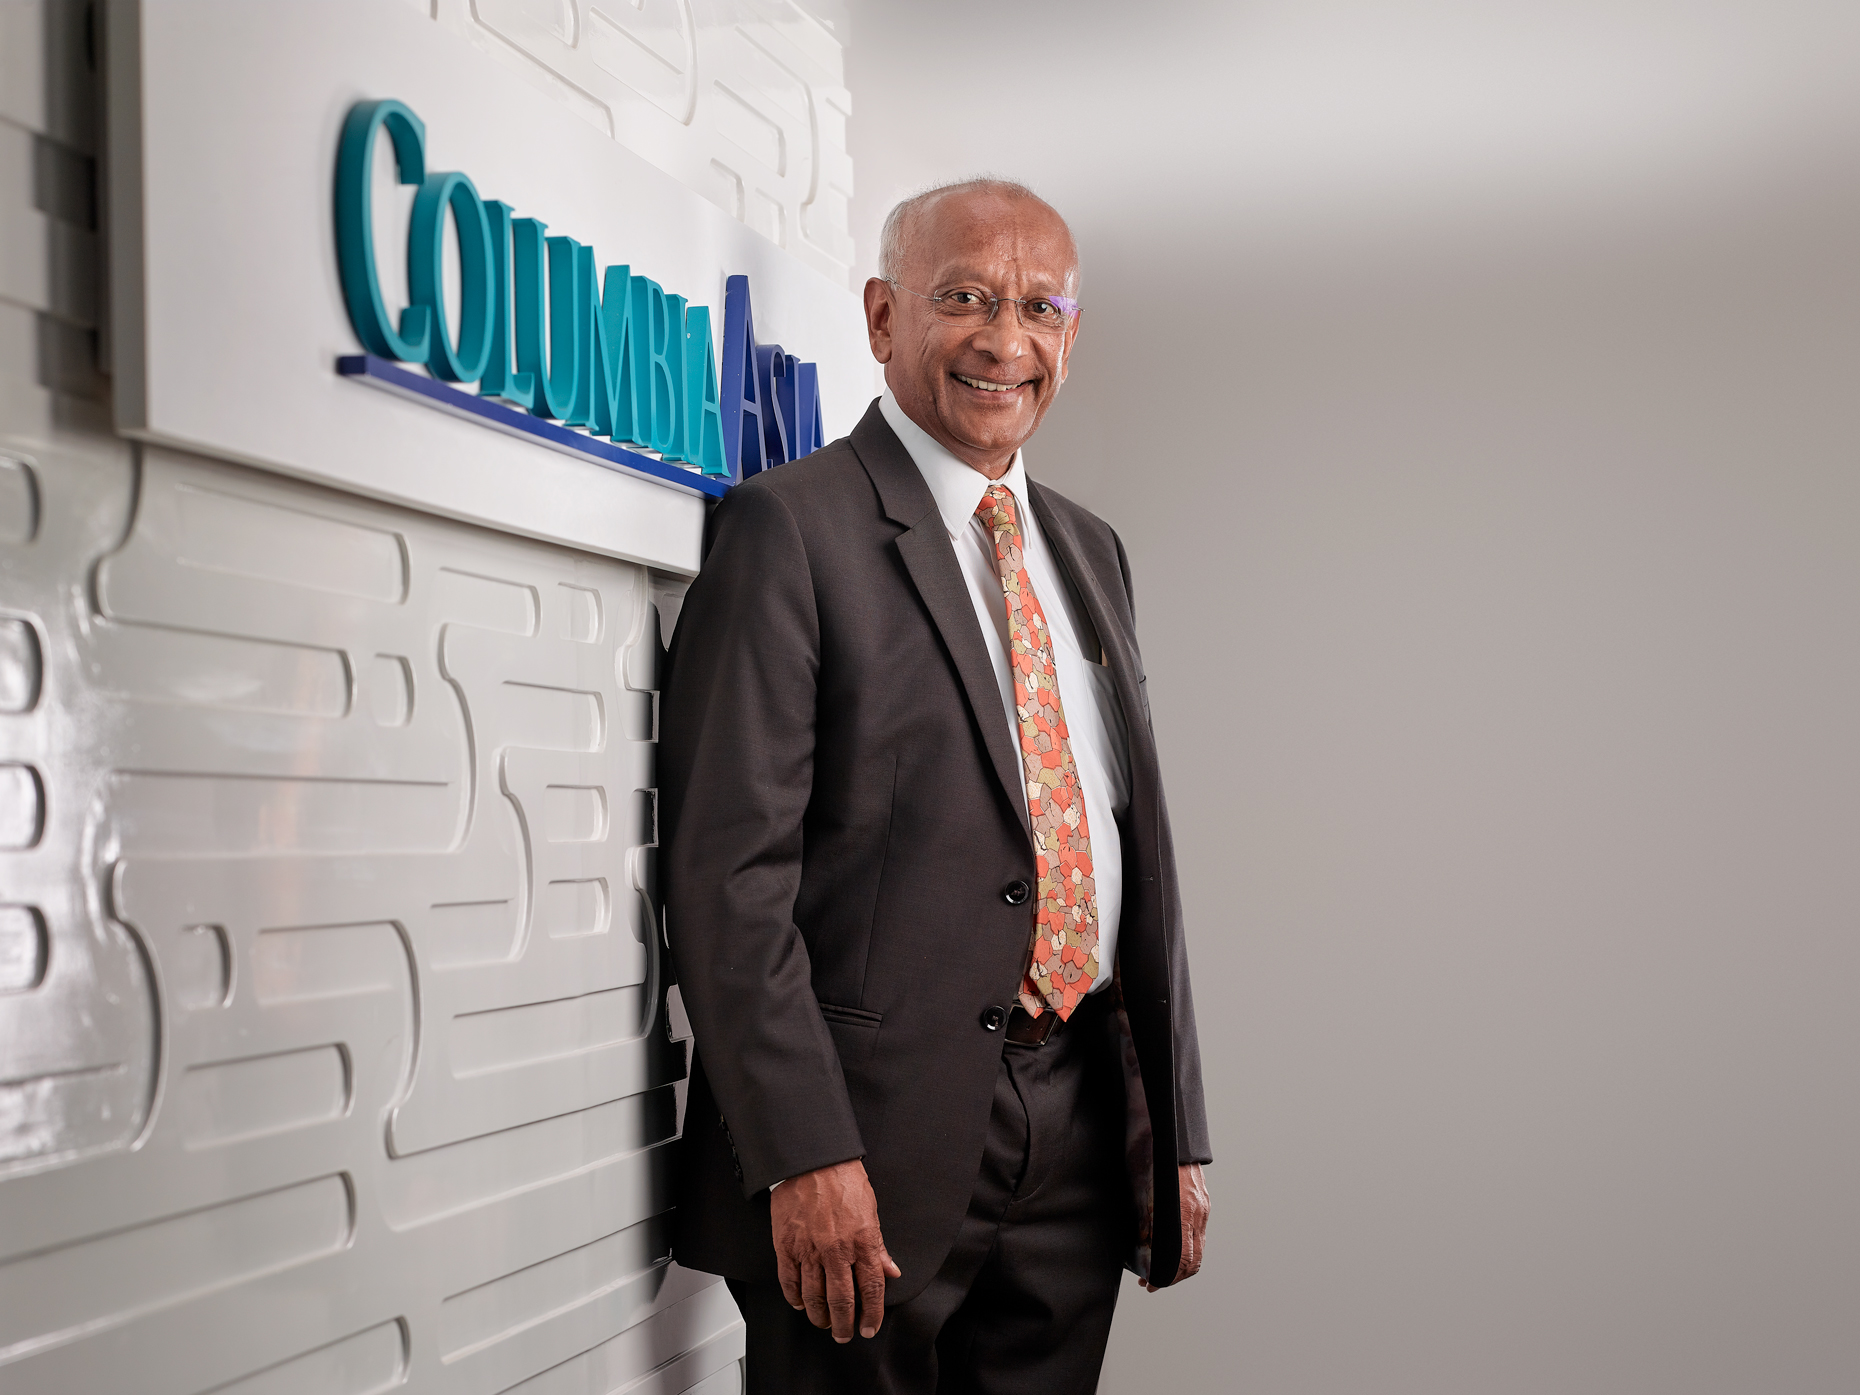 Professional Corporate Headshot for THE CEO MAGAZINE , Group CEO & MD of Columbia Asia Hospitals